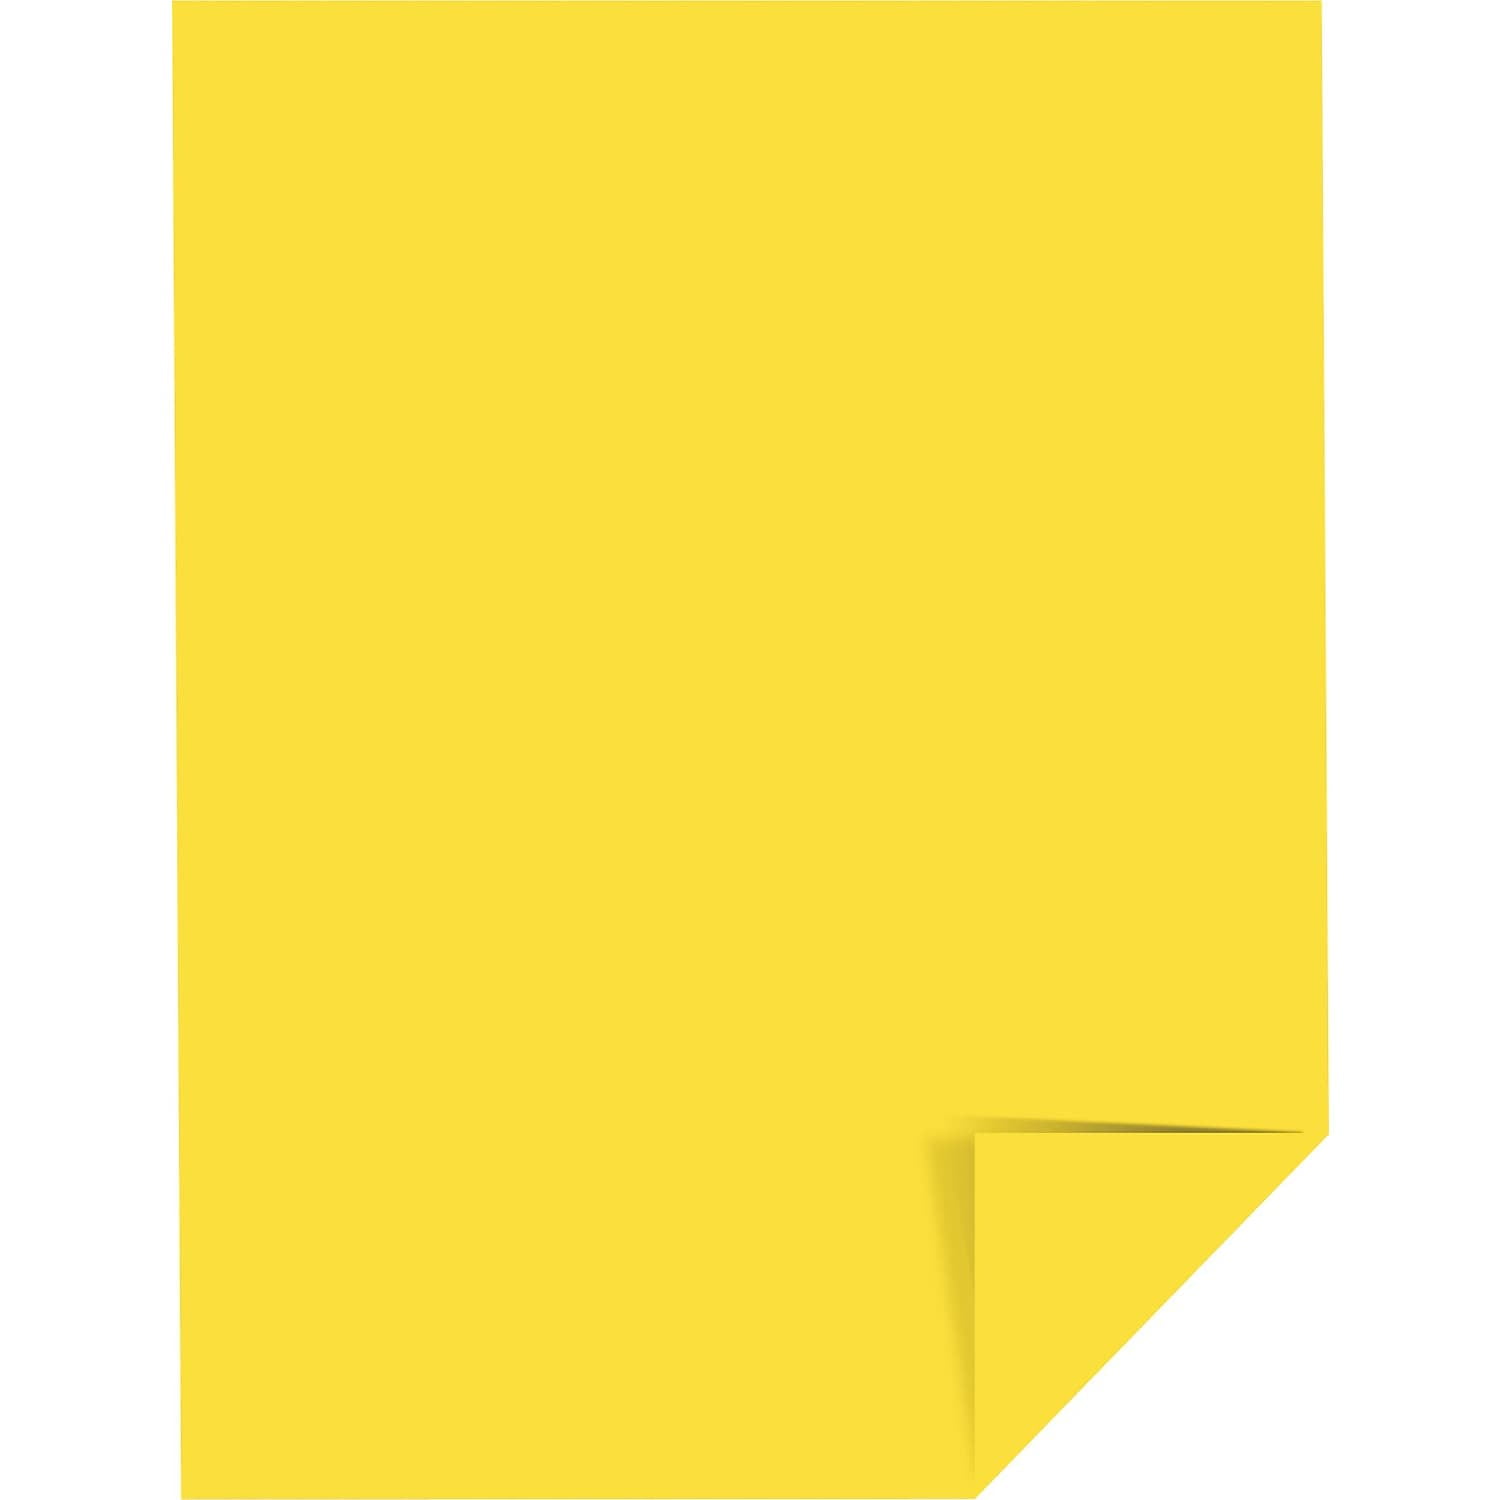 24 lb/89 gsm 8.5 x 11 Solar Yellow 22531 Astrobrights Color Paper 500 Sheets 